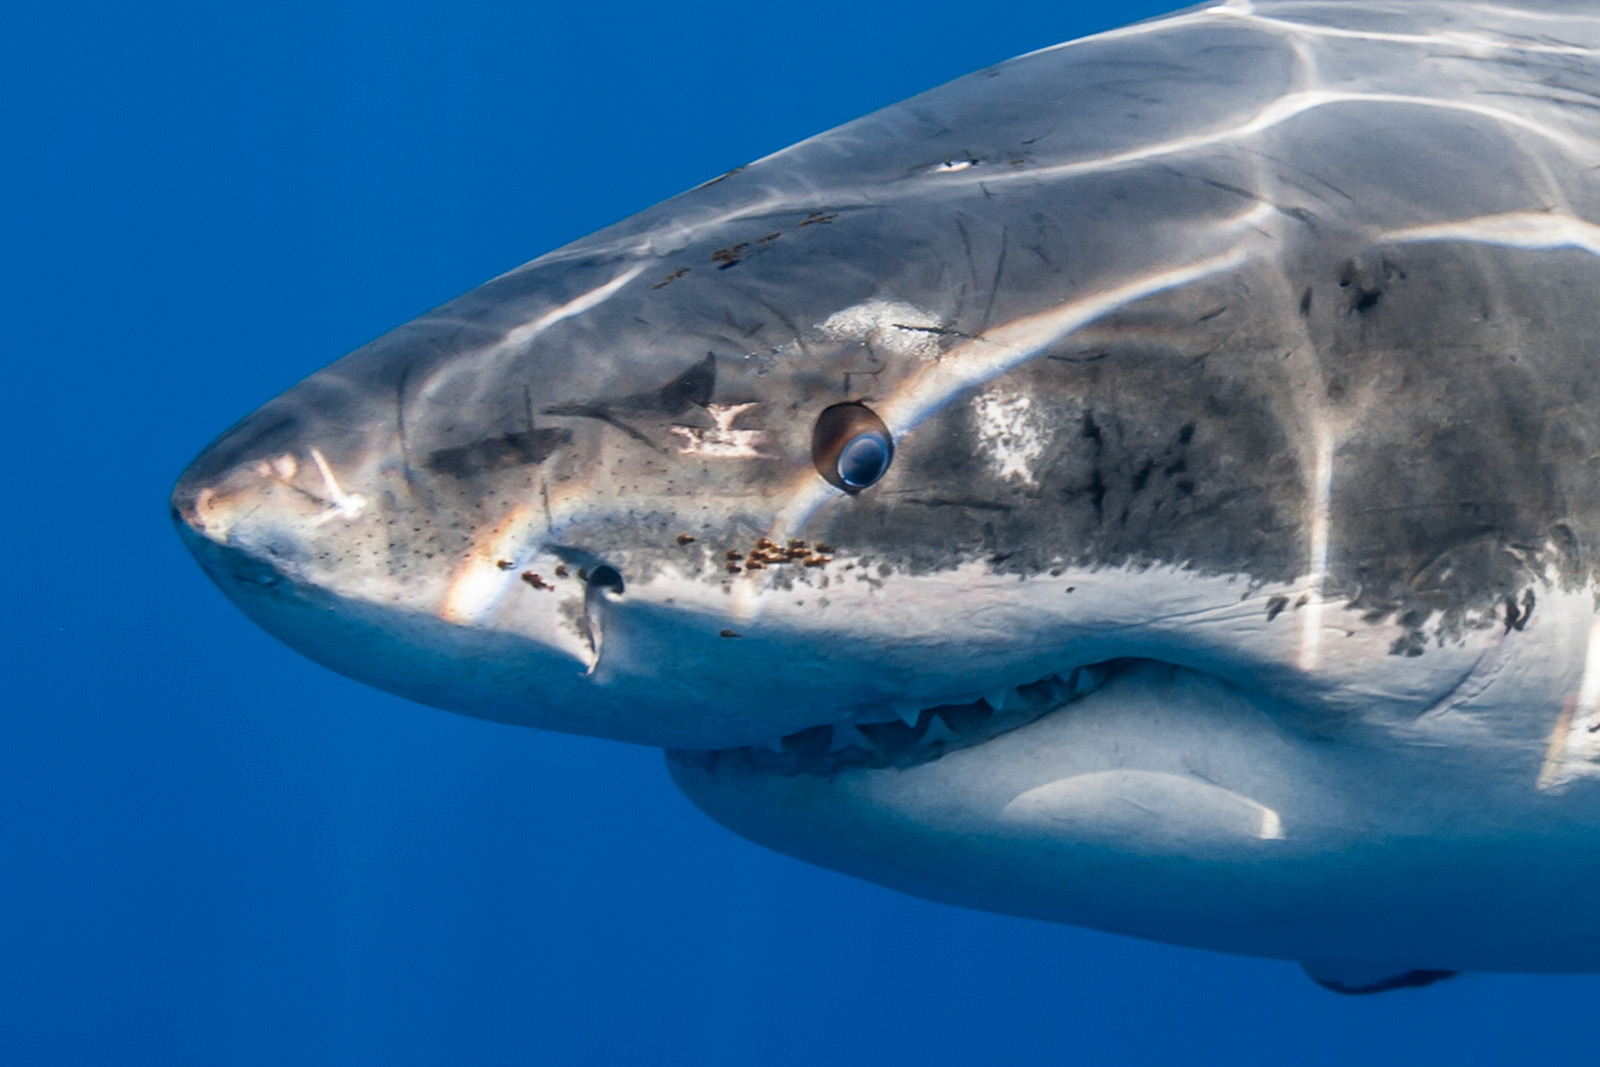 Close-up of a great white shark with blue iris  image